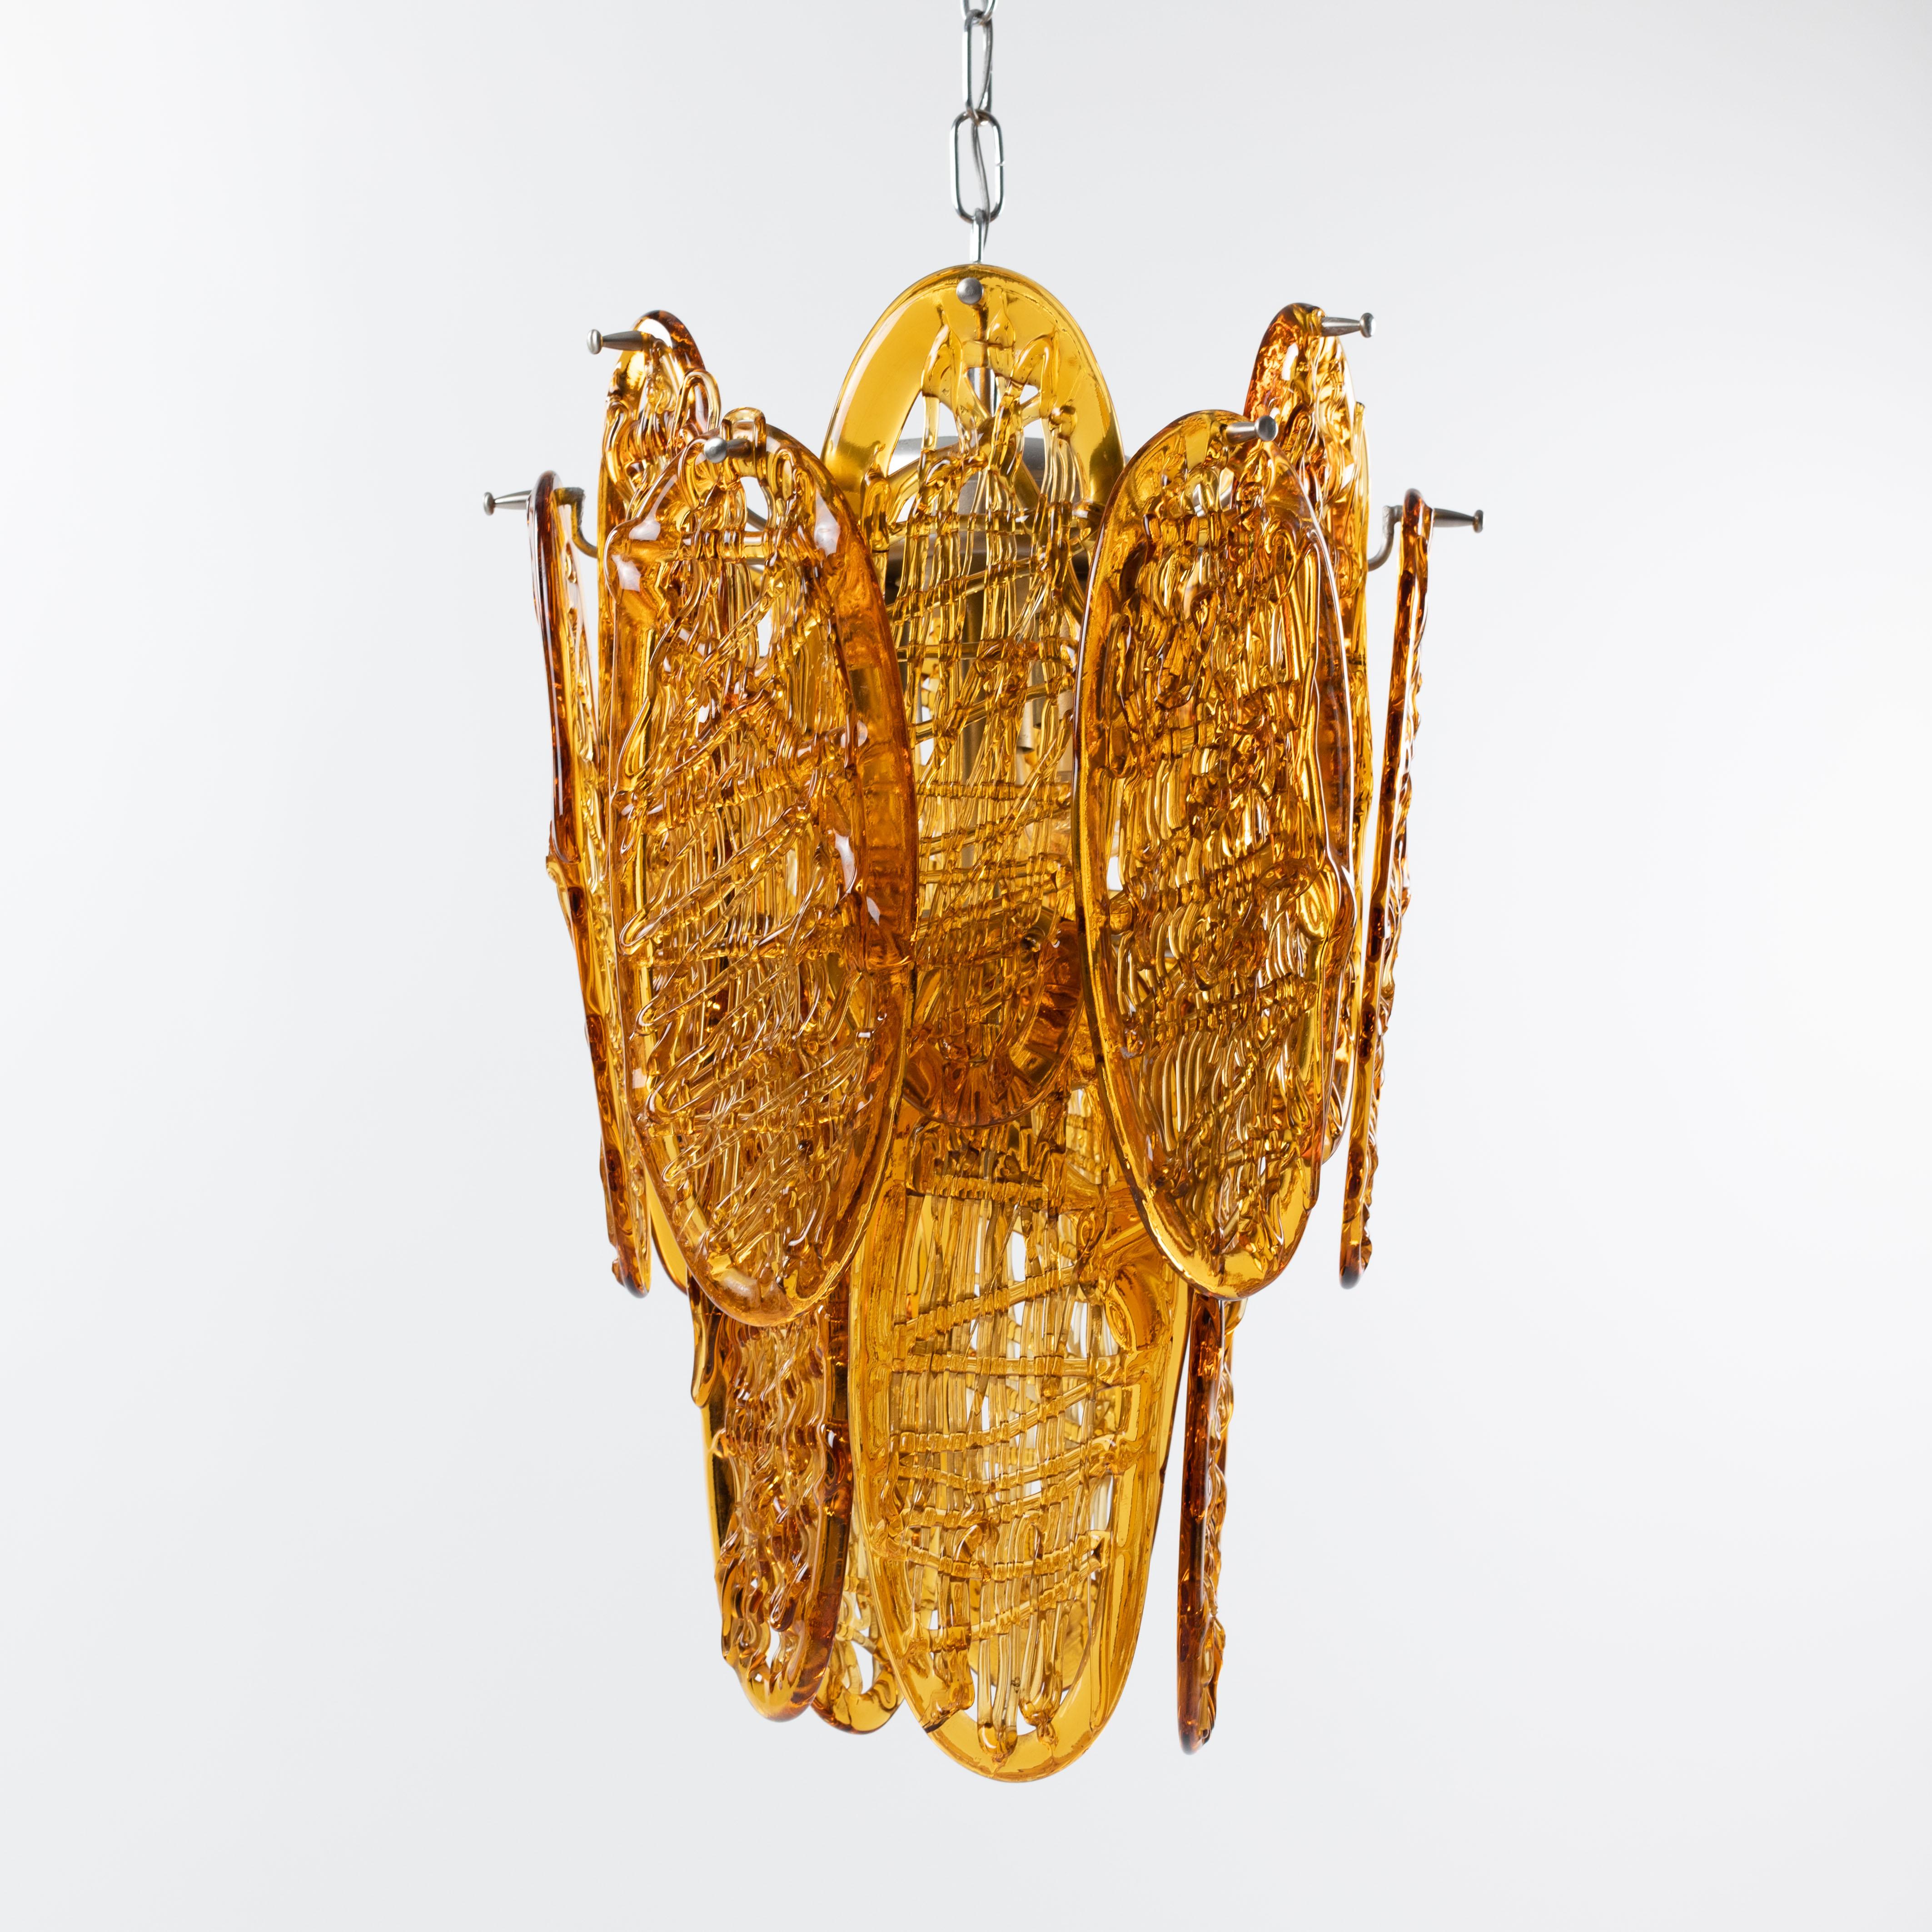 Italian mid-century chandelier manufactured by the company AV MAZZEGA in the 1960s.

17 cognac-coloured, oval Murano glass medallions with a size of 32x12cm form the conical lamp.
The glass medallions are double-storeyed, i.e. staggered, so that